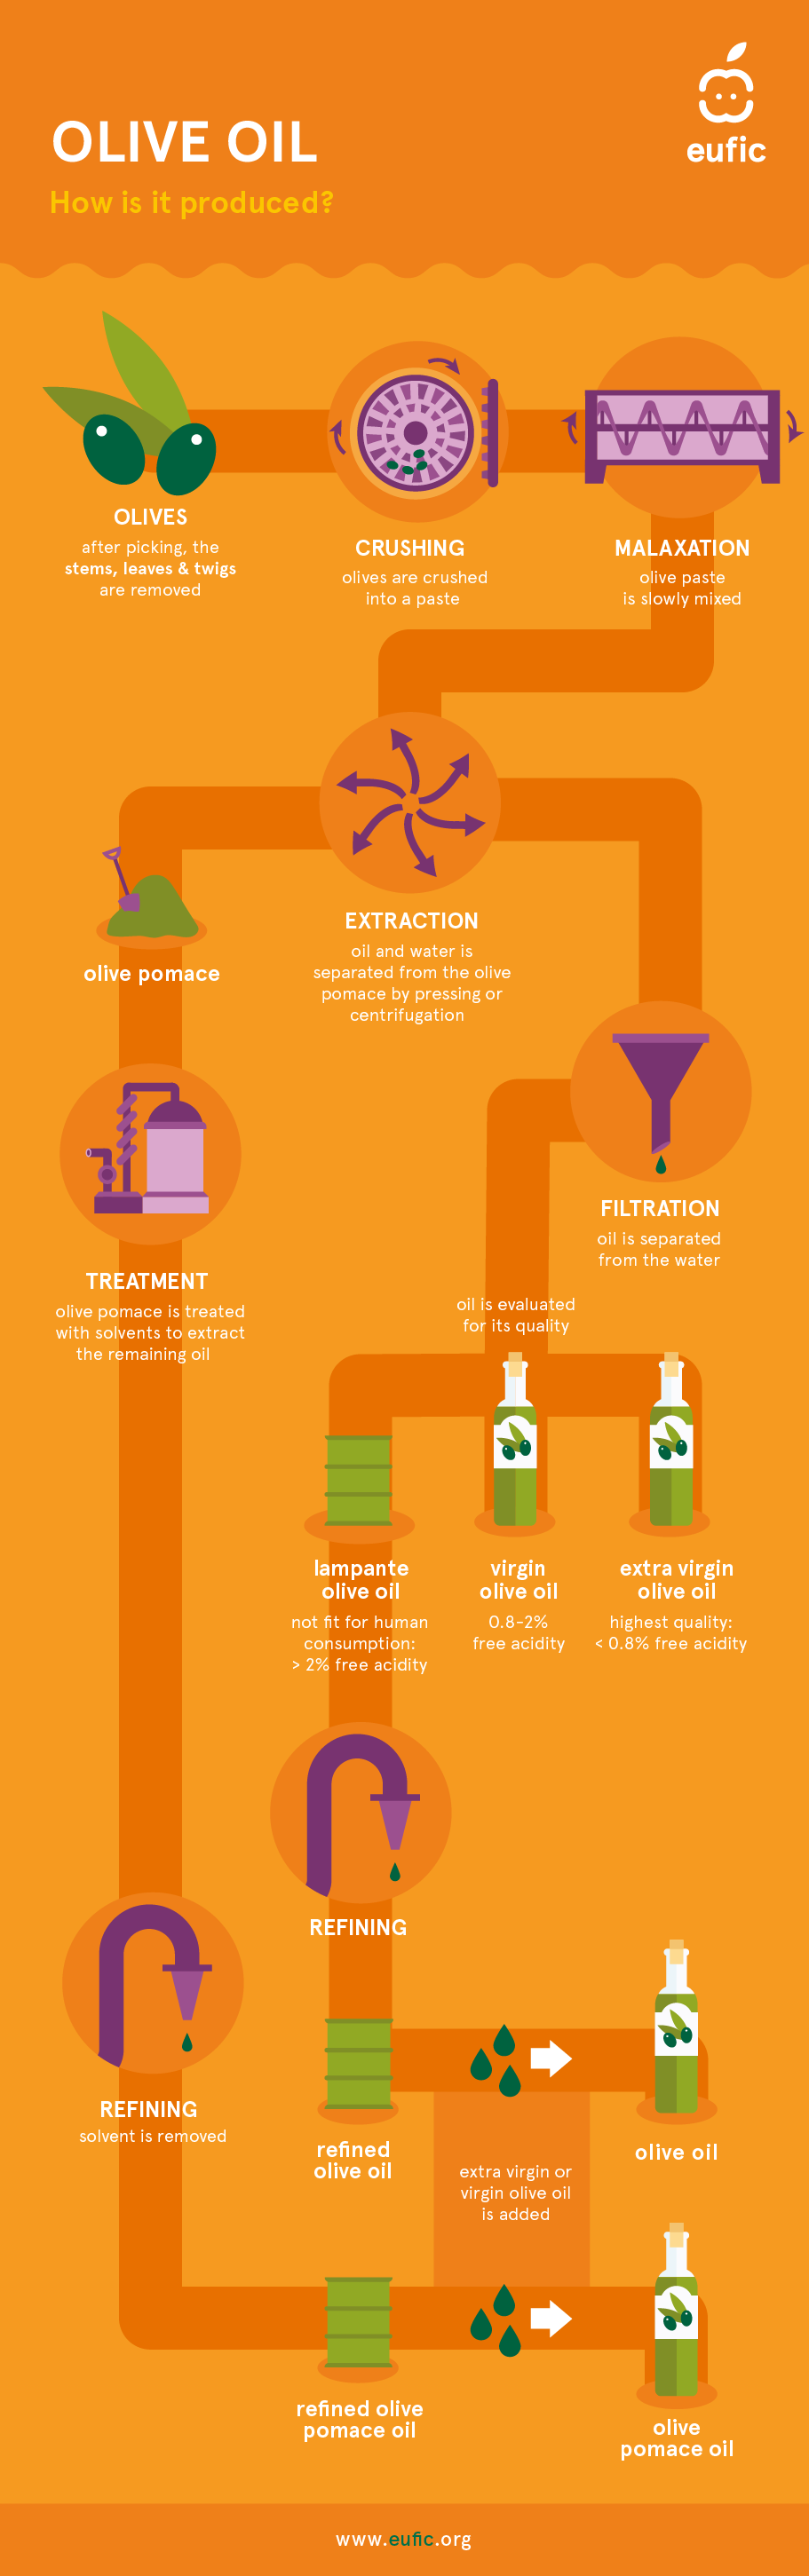 infographic explaining how olive oil is produced